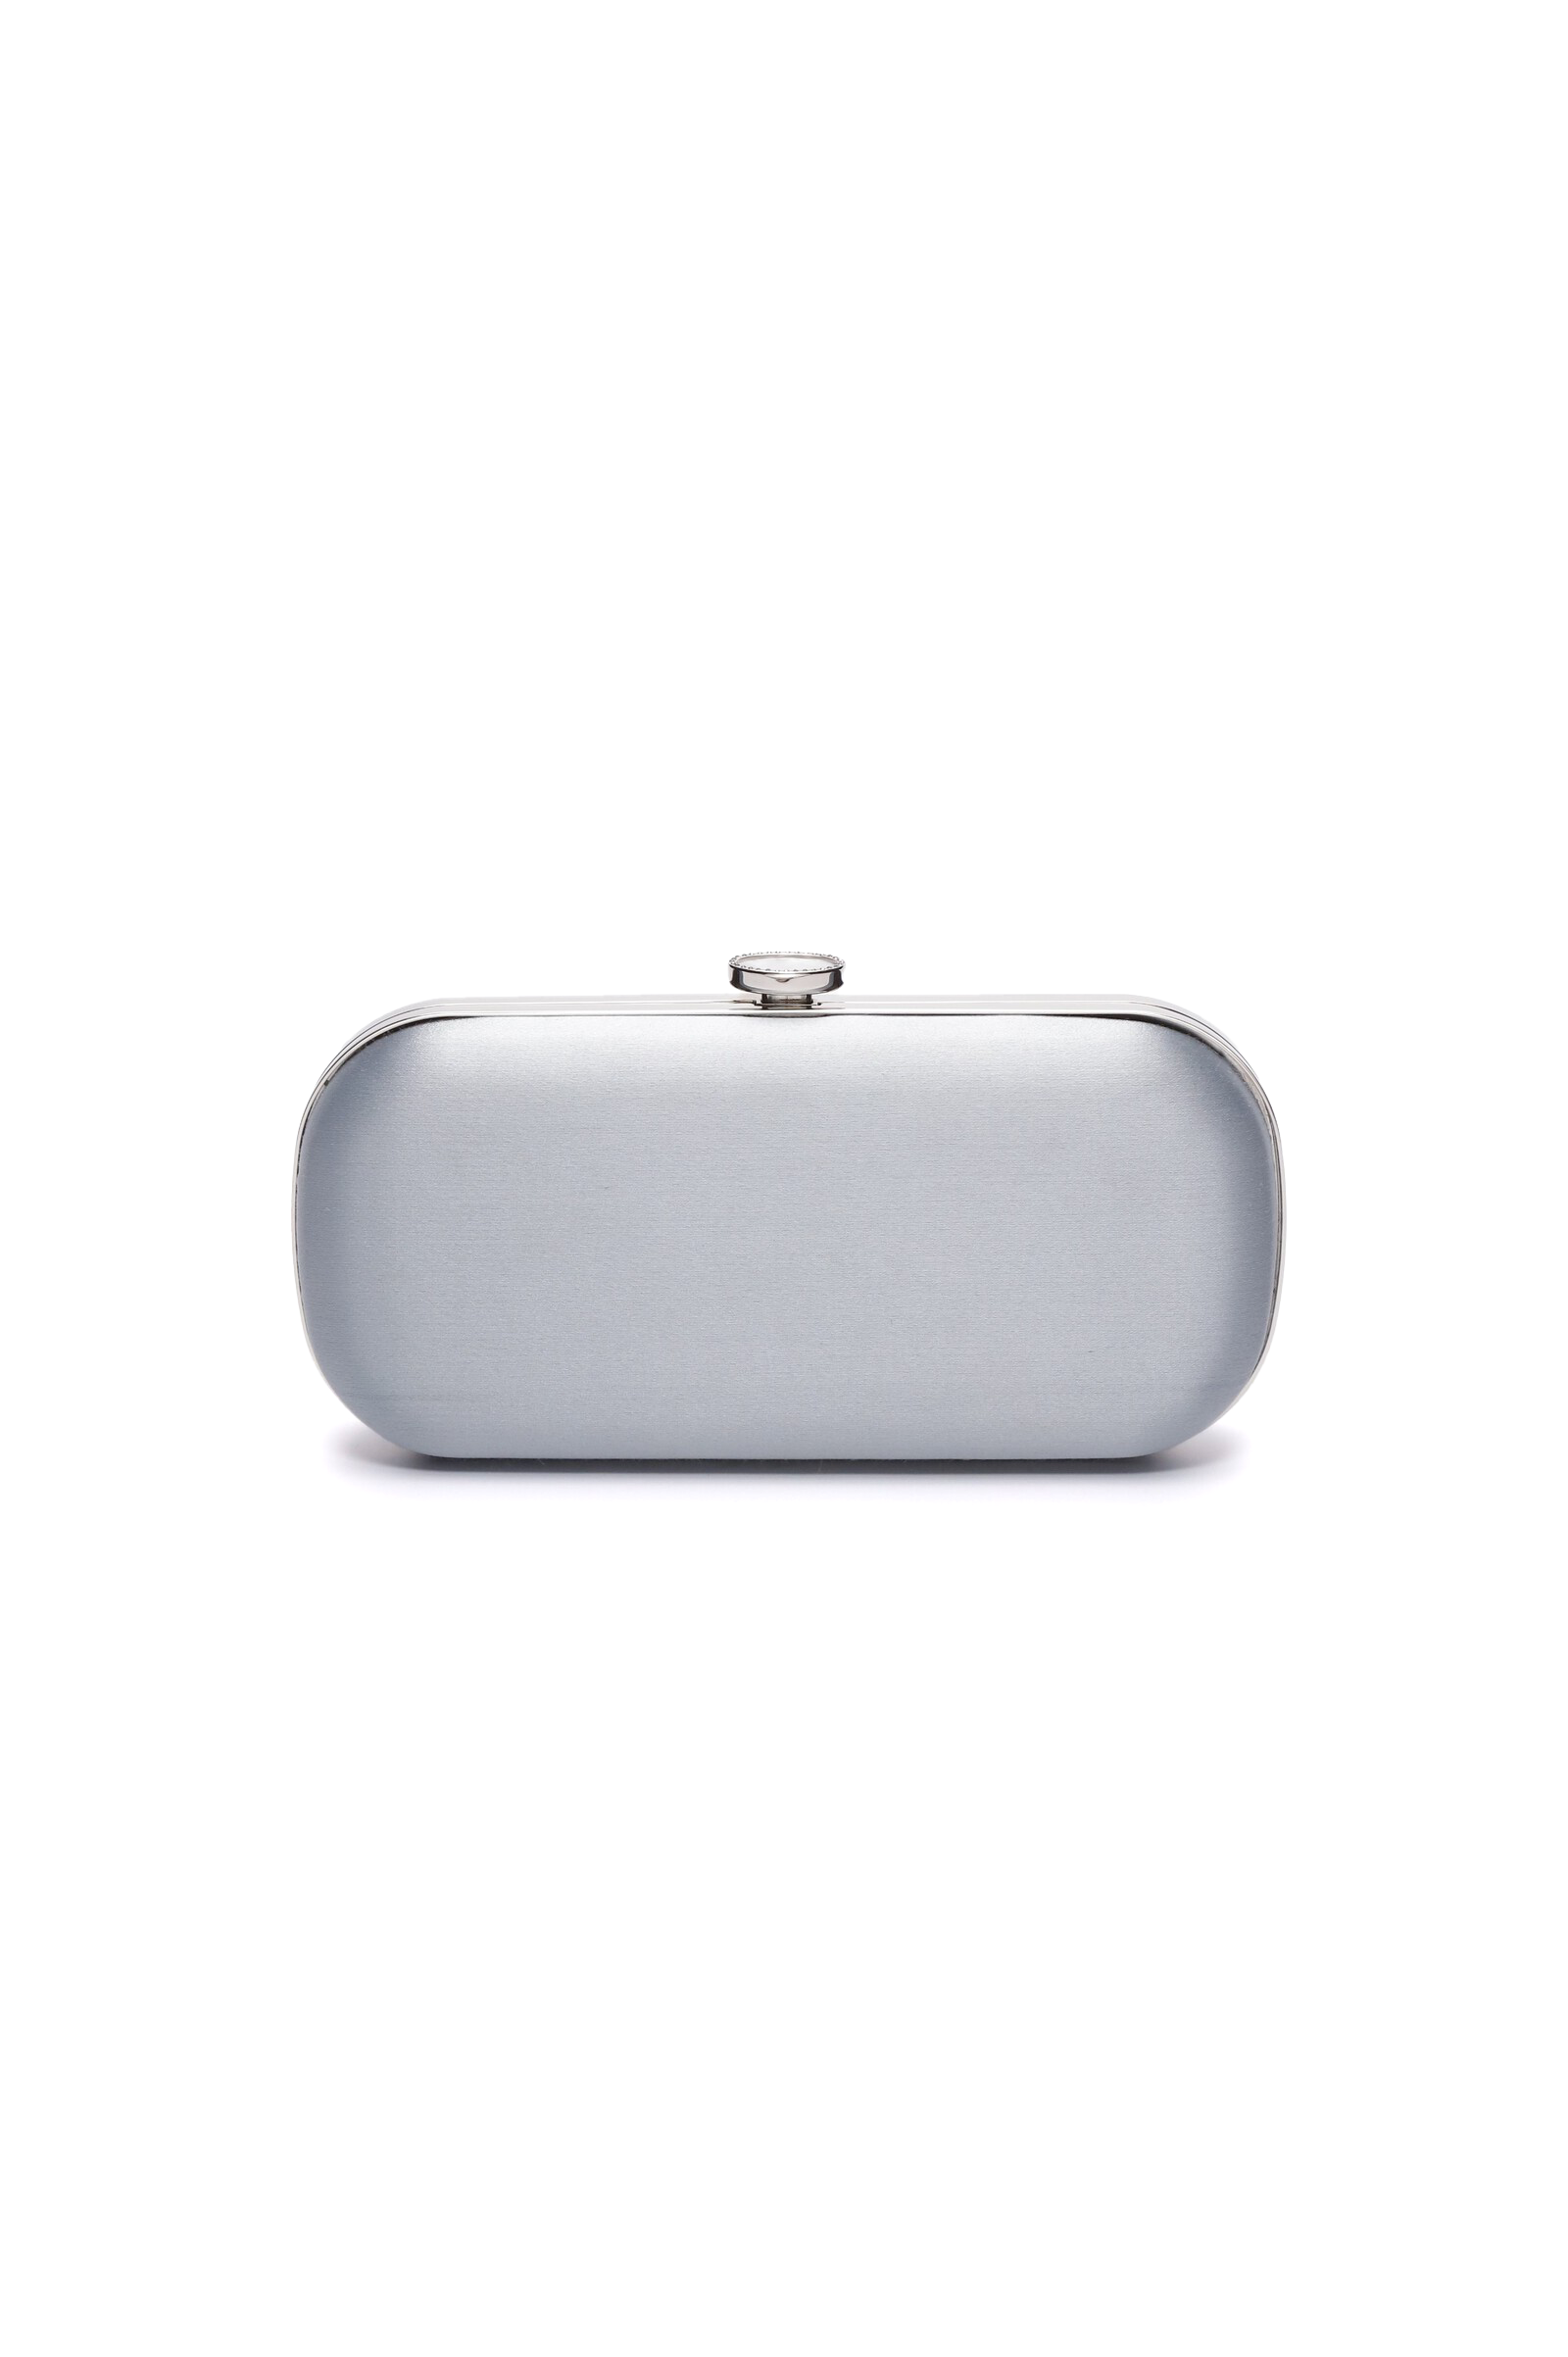 Bella Clutch Steel Blue Satin Petite from The Bella Rosa Collection on a white background.